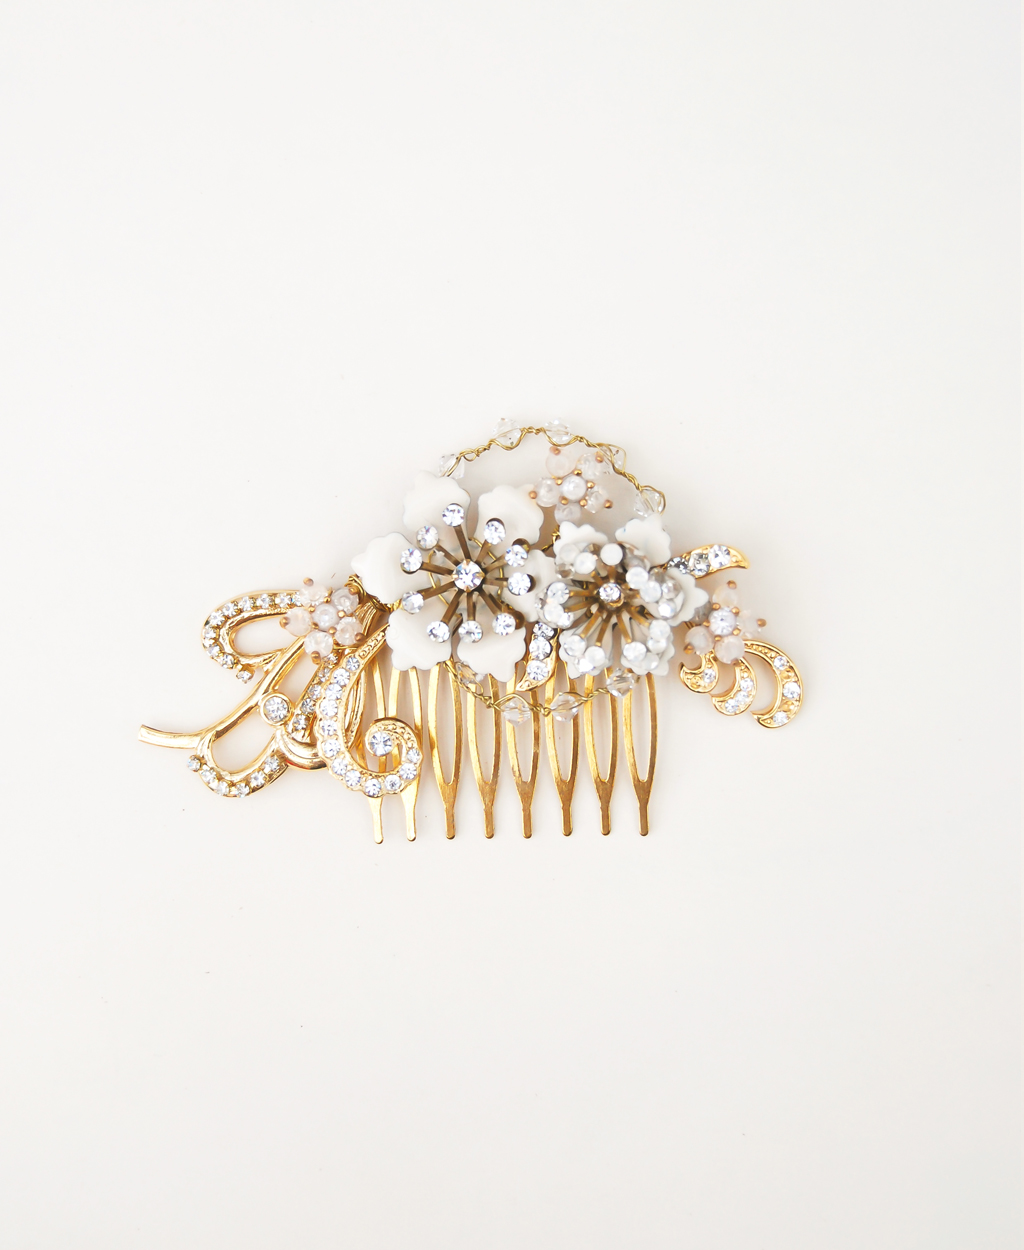 Gold Bridal Hair Comb from Elibre Handmade